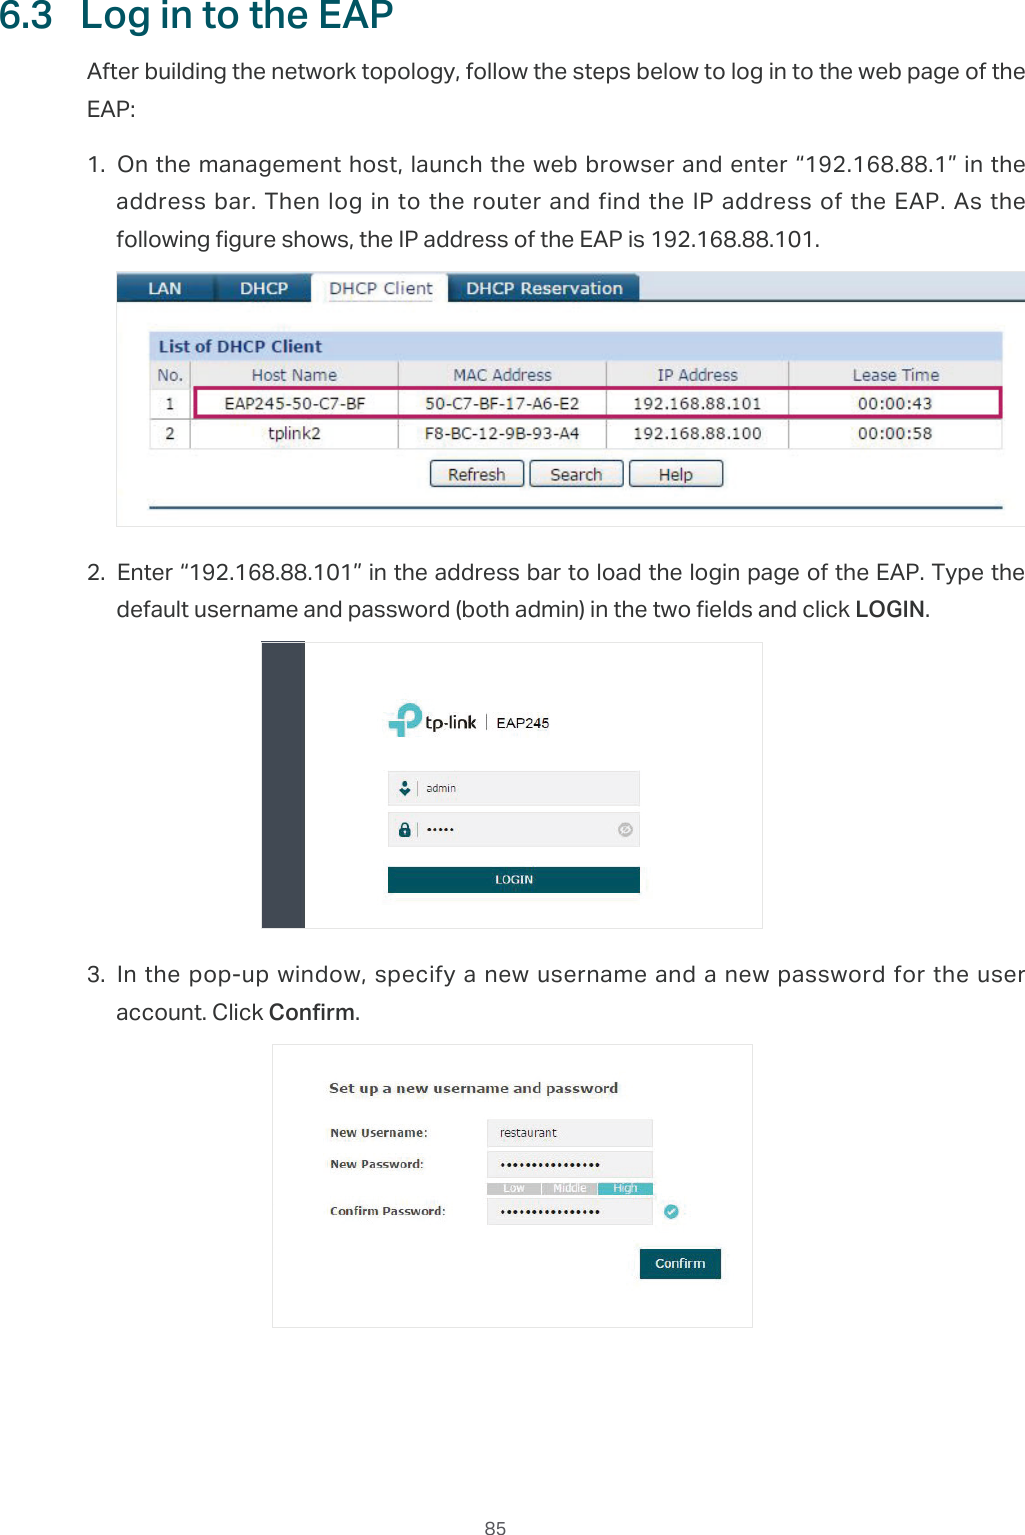  856.3  Log in to the EAPAfter building the network topology, follow the steps below to log in to the web page of the EAP:1. On the management host, launch the web browser and enter “192.168.88.1” in the address bar. Then log in to the router and find the IP address of the EAP. As the following figure shows, the IP address of the EAP is 192.168.88.101.2. Enter “192.168.88.101” in the address bar to load the login page of the EAP. Type the default username and password (both admin) in the two fields and click LOGIN.3. In the pop-up window, specify a new username and a new password for the user account. Click Confirm.